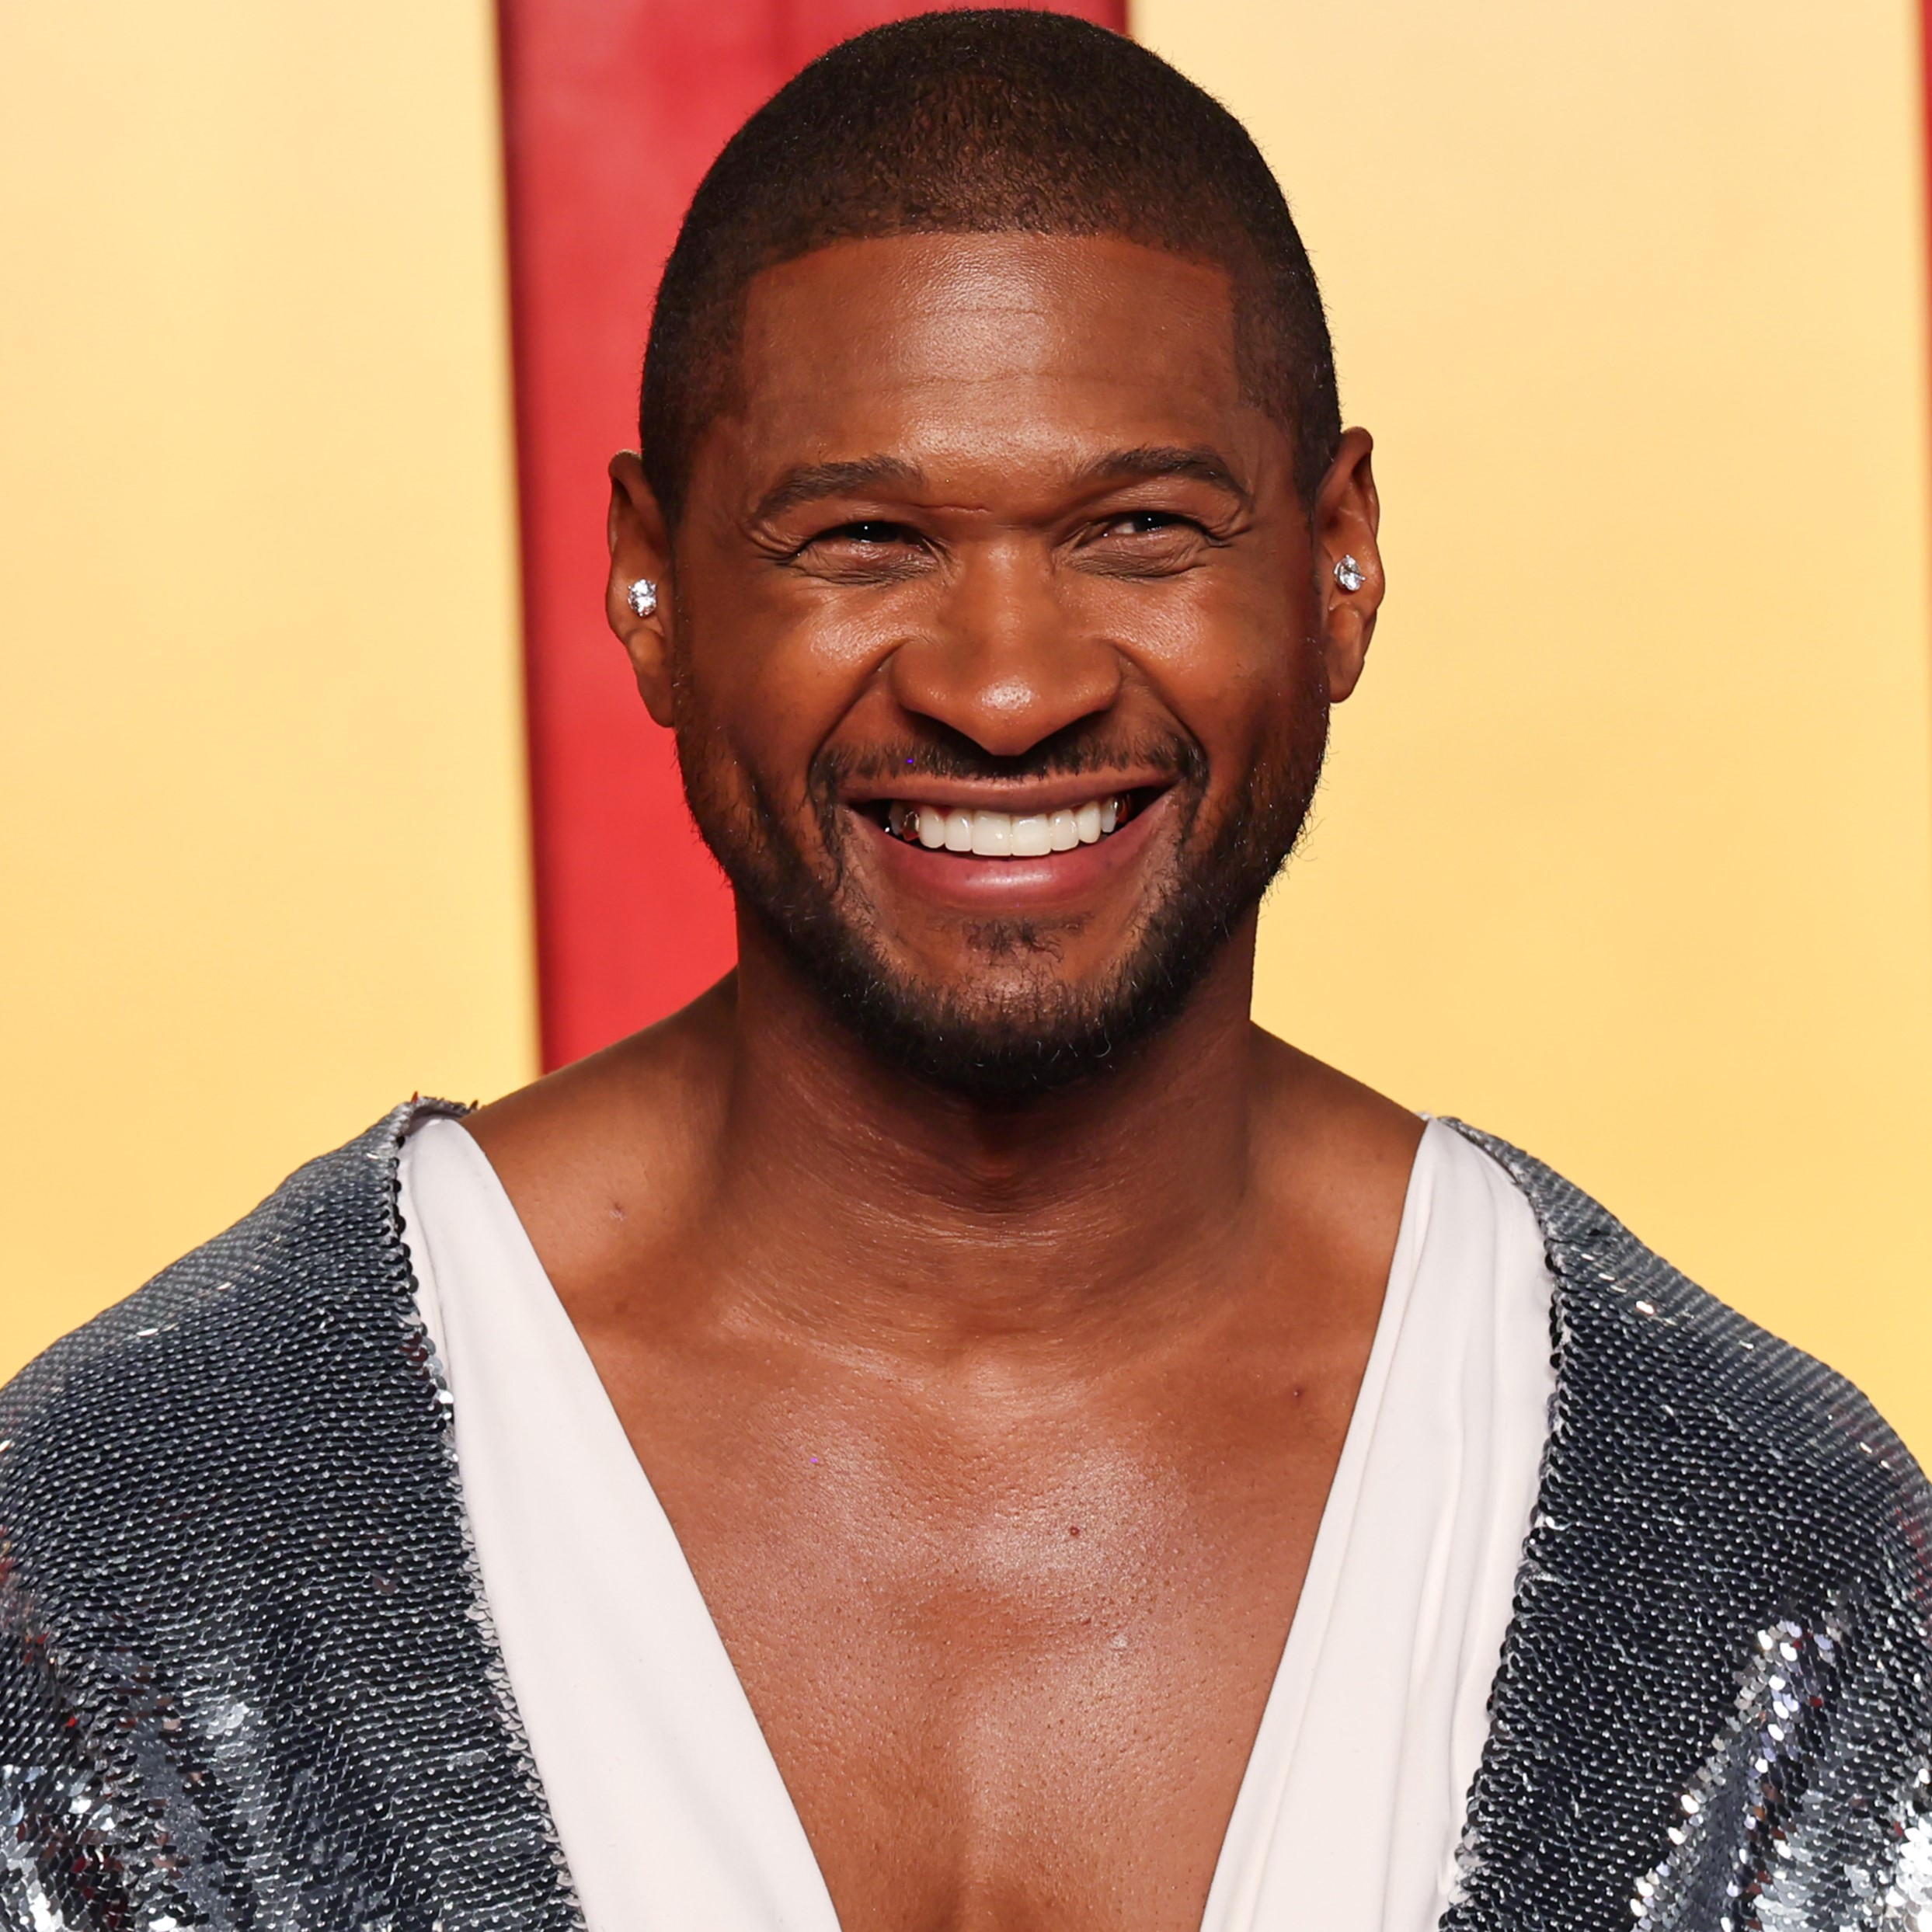 Usher on therapy and preserving your headspace